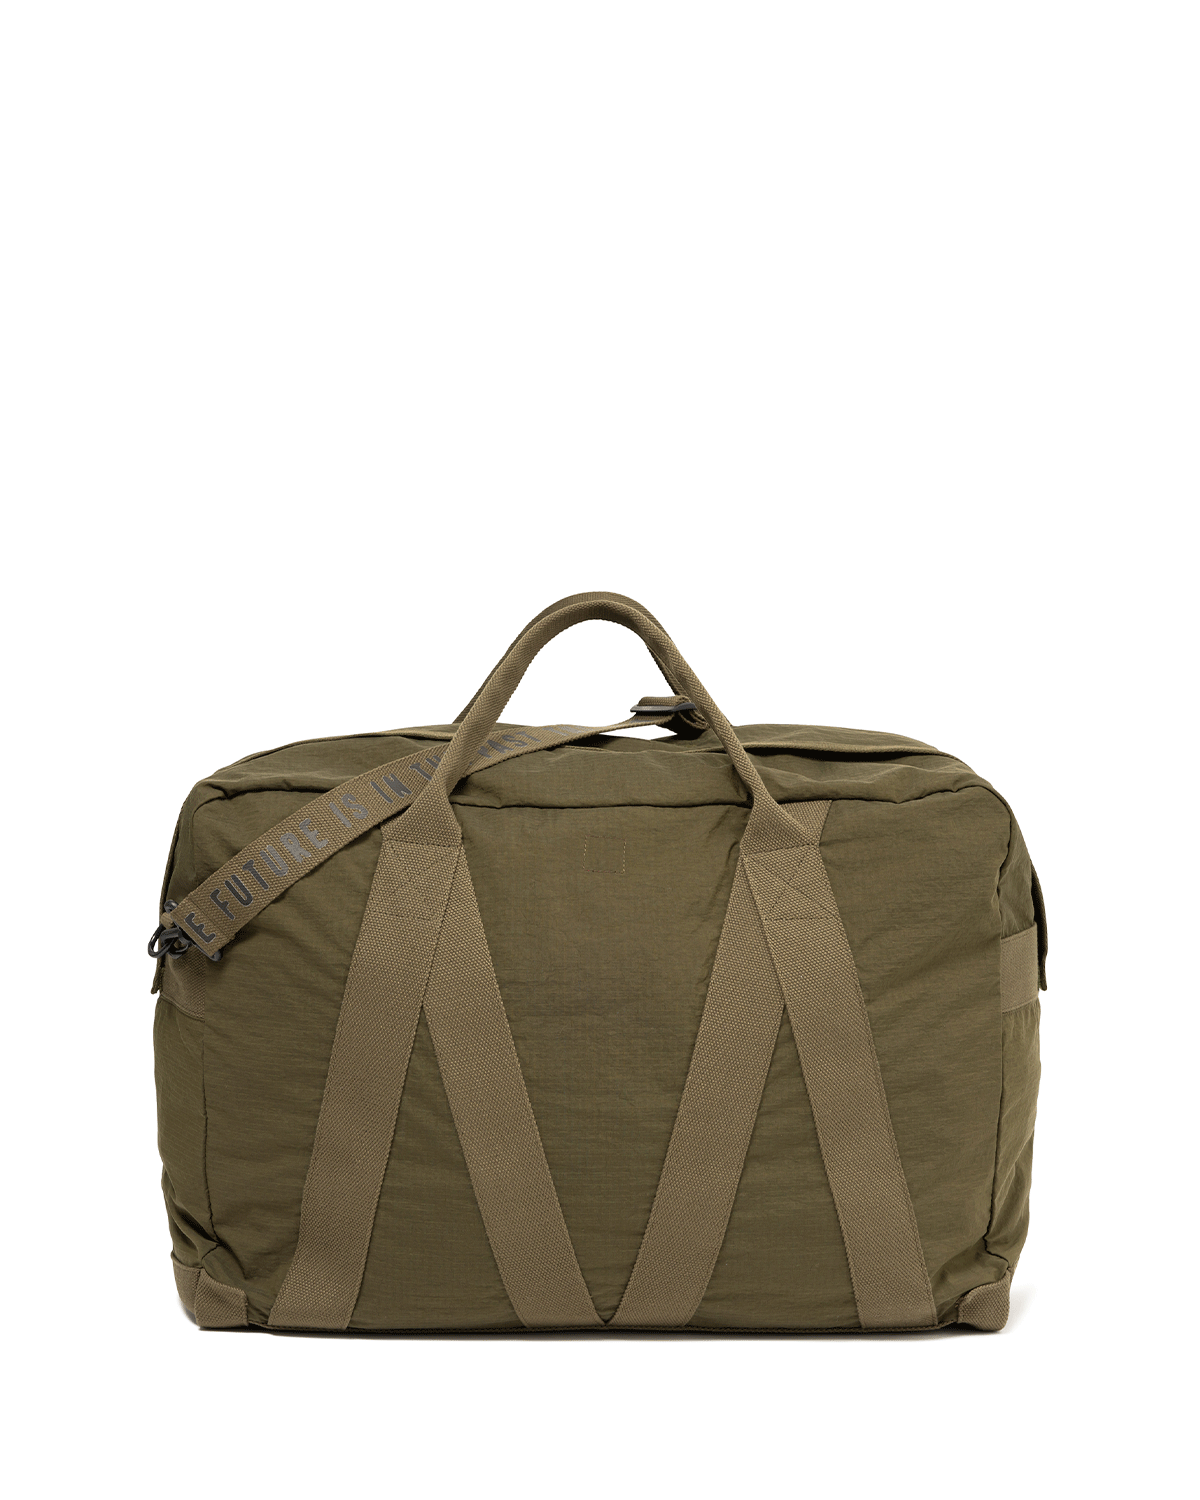 Military Carry Bag Olive Drab